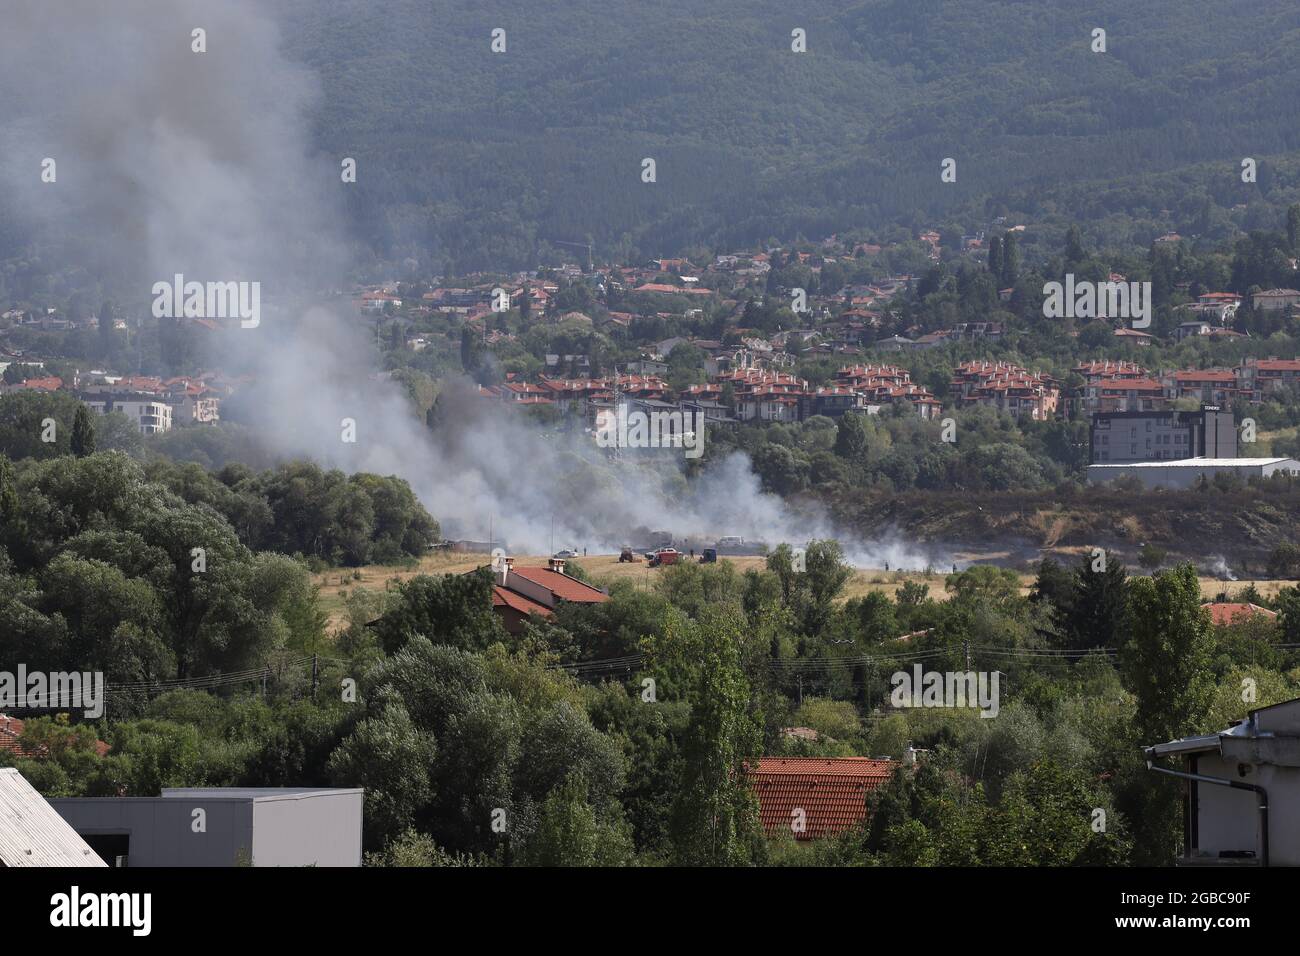 A large fire is burning from burning stubble in Sofia, Bulgaria on August, 3, 2021. The fire is burning the forest, field, houses above living areas M Stock Photo